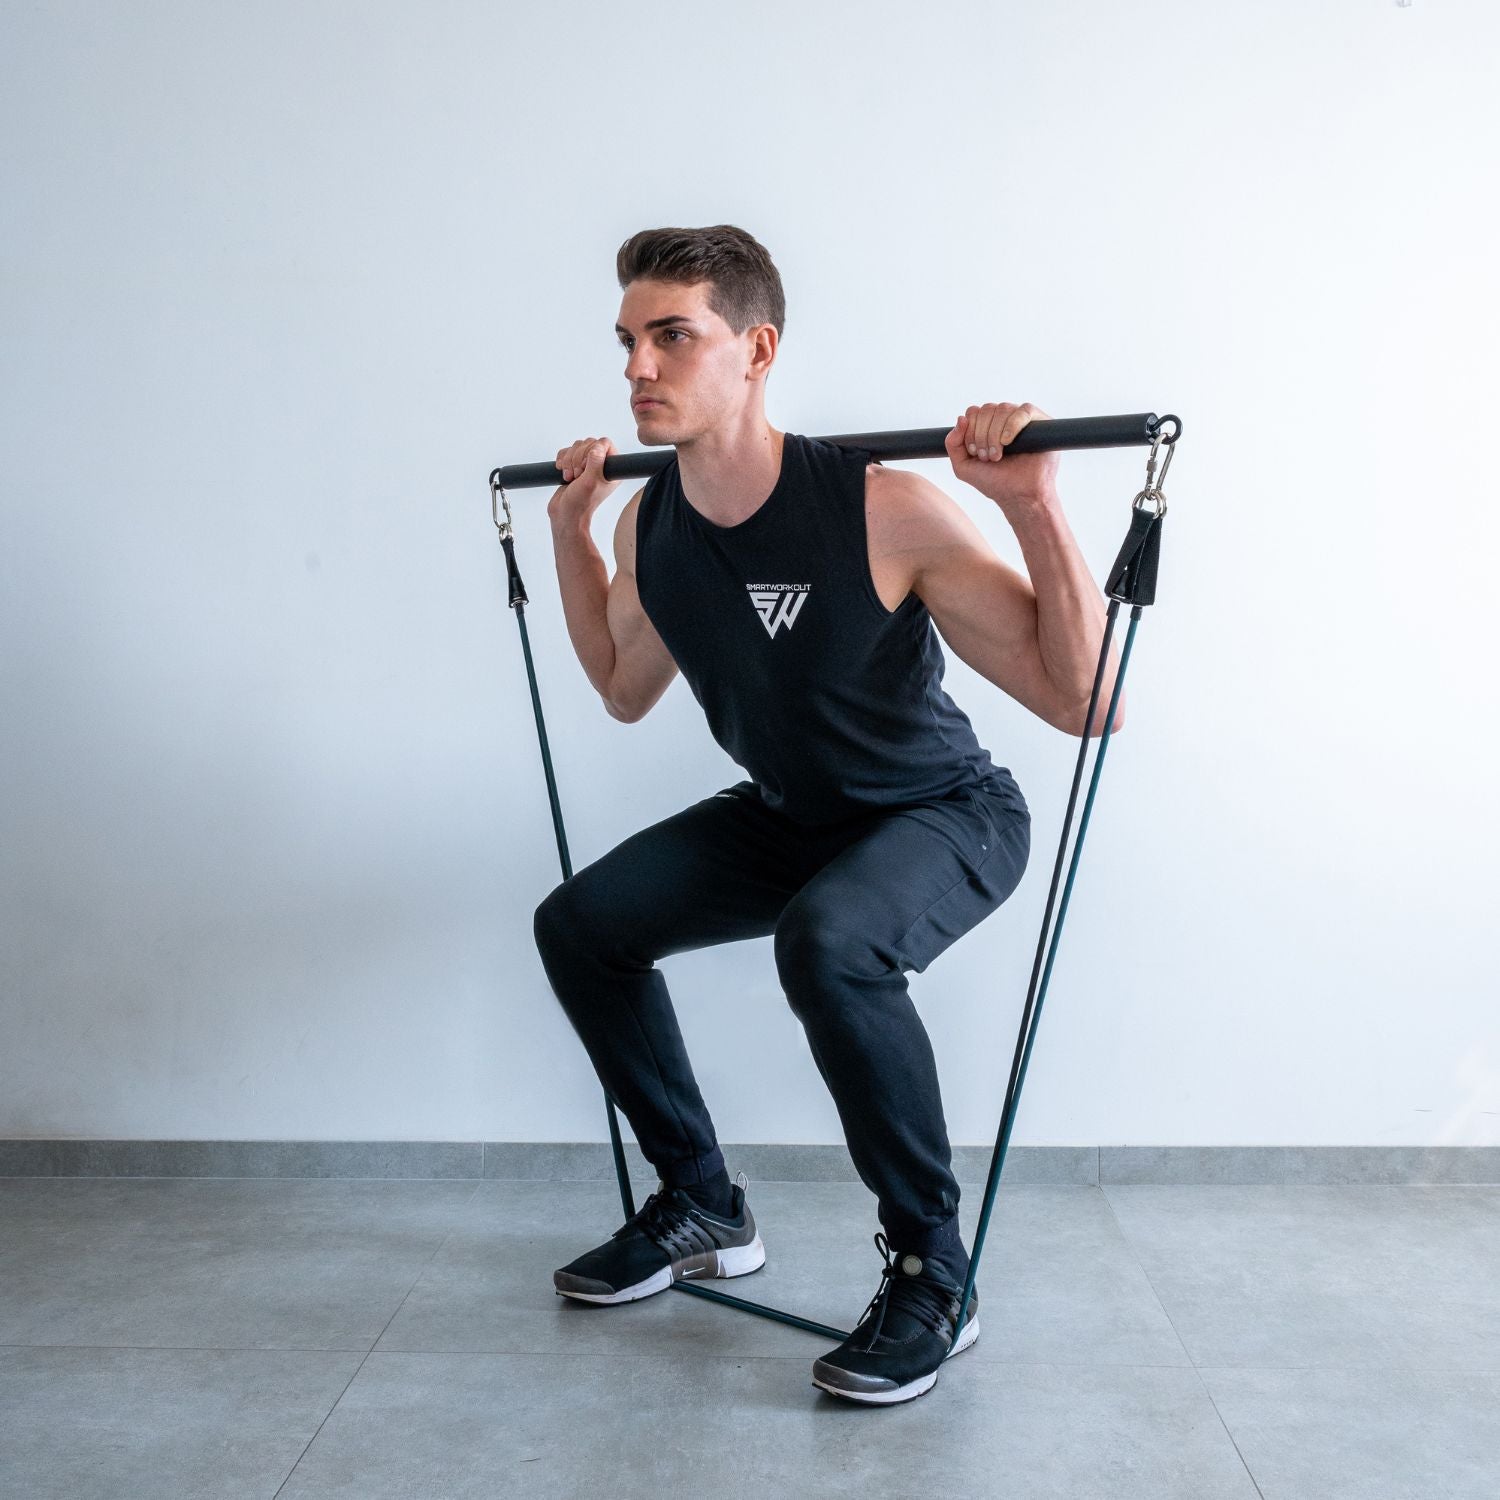 Squat with resistance bands